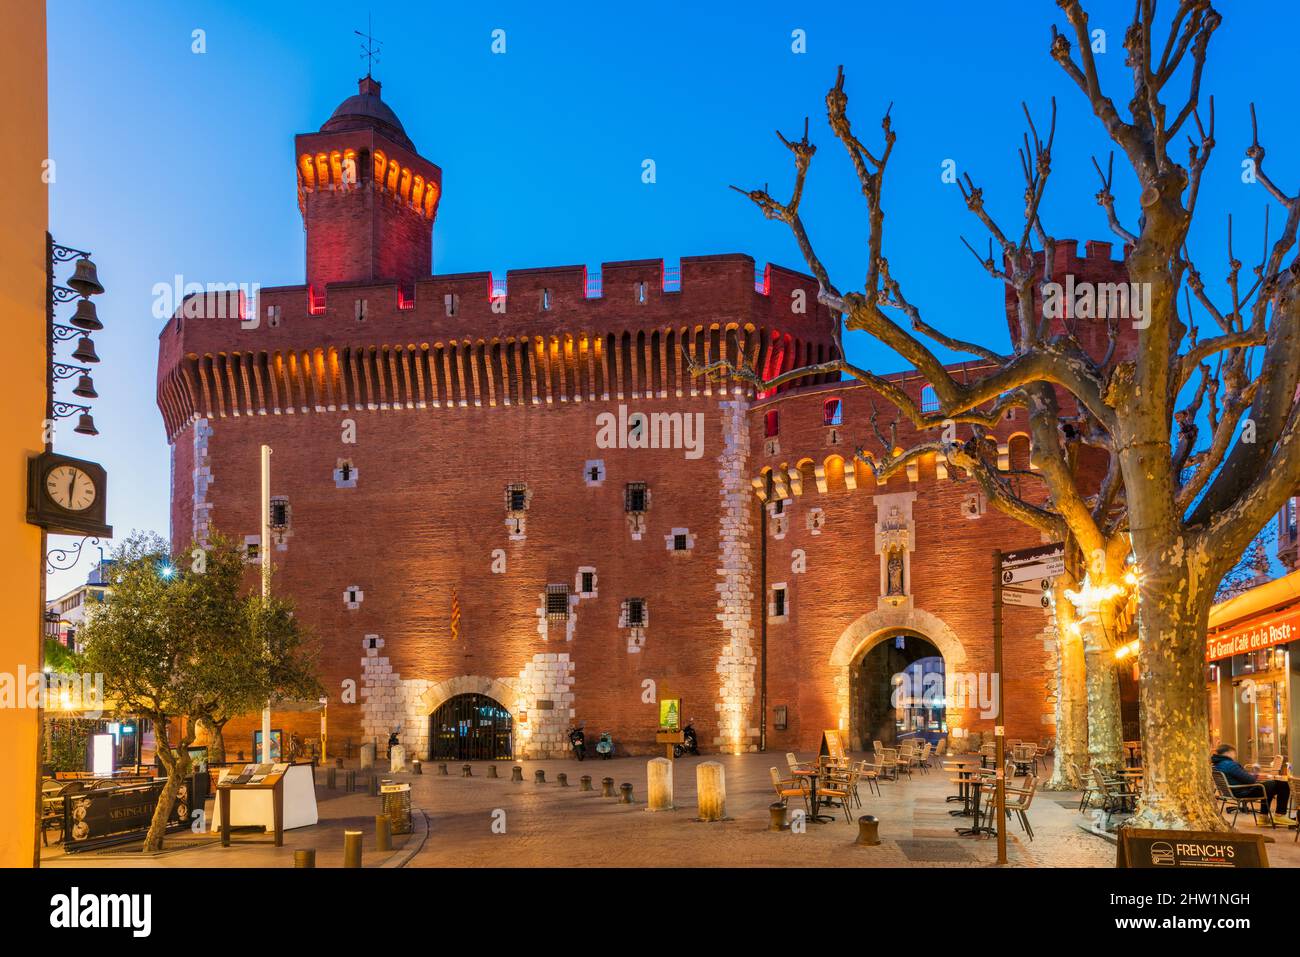 The Castillet is an ancient fortification and city gate located in Perpignan, Pyrénées-Orientales, France Stock Photo